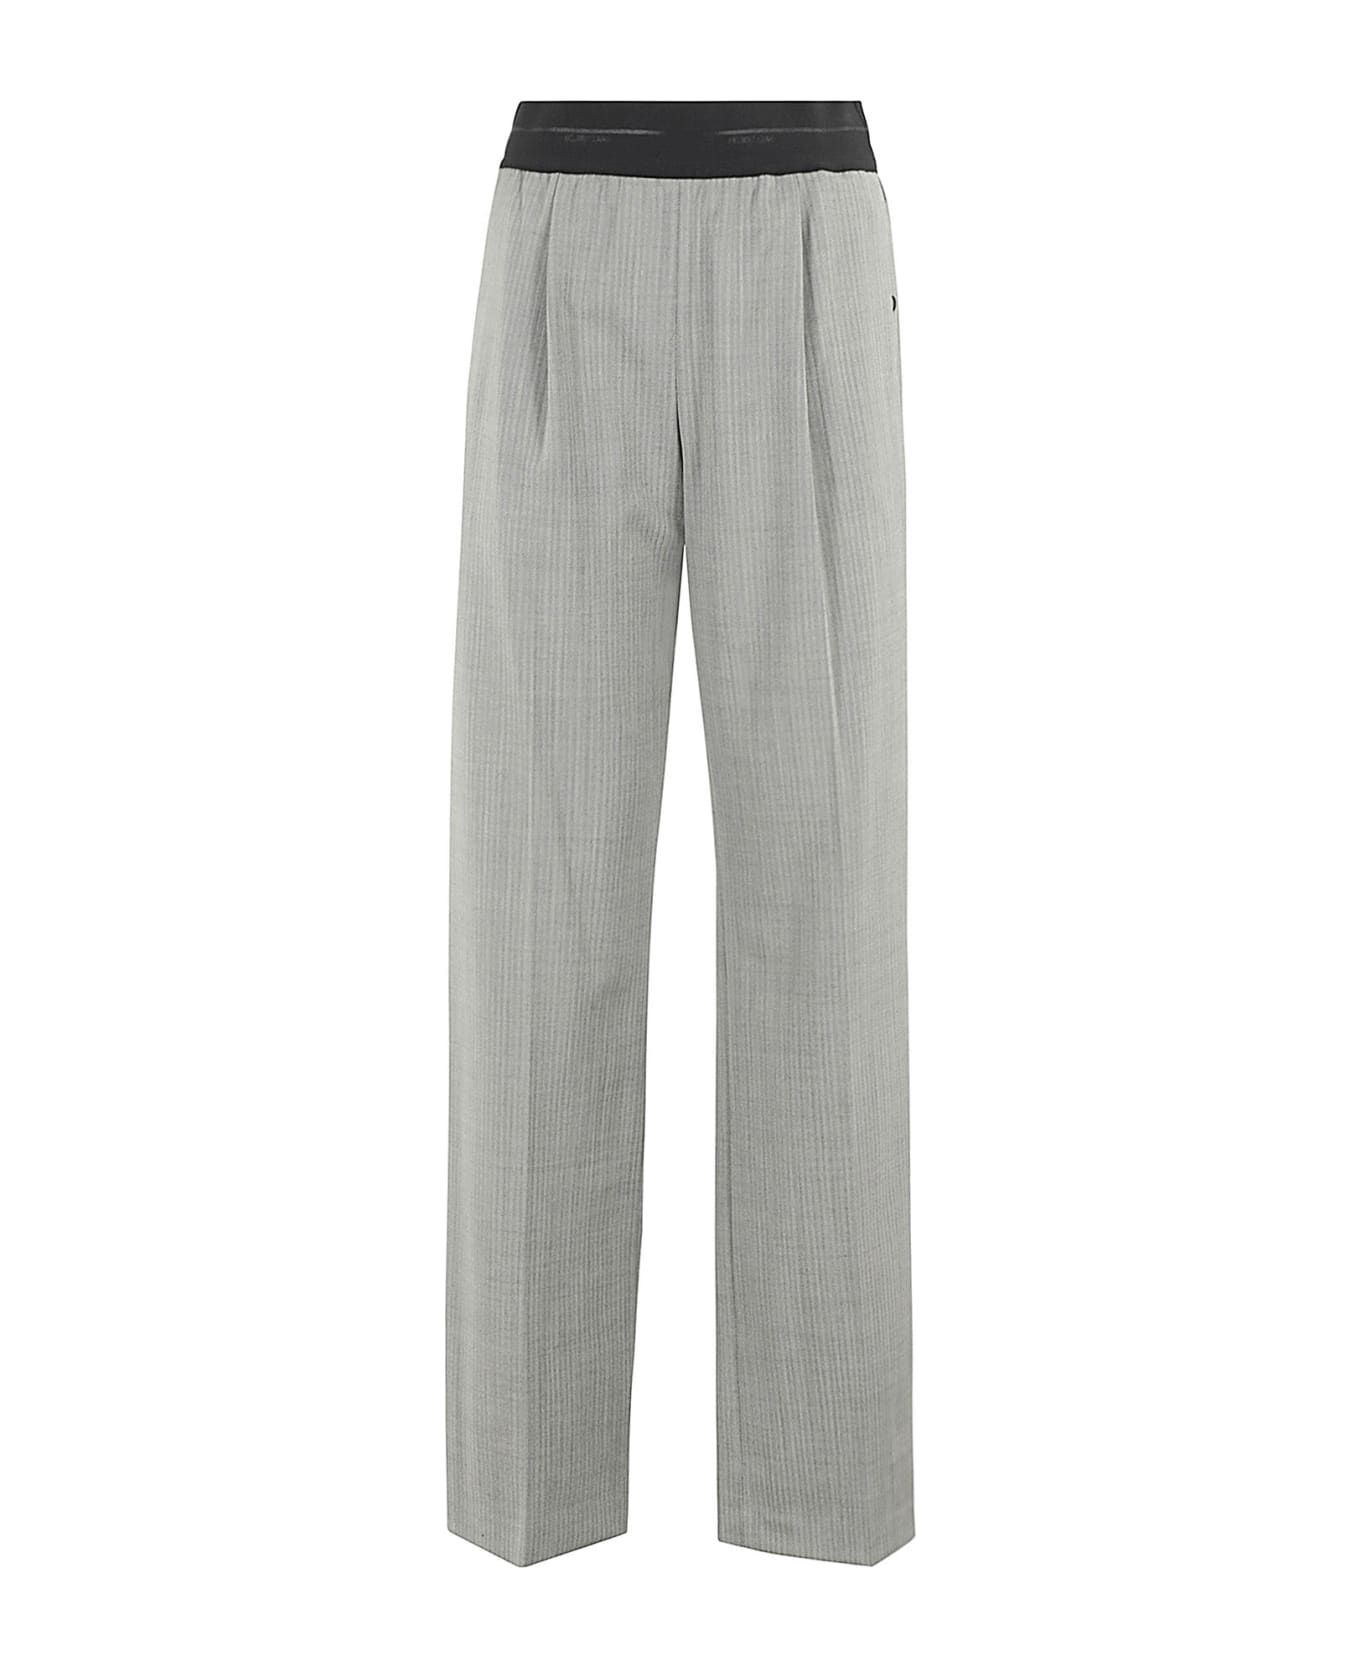 Helmut Lang Pull On Suit Pant - Acx Black White ボトムス